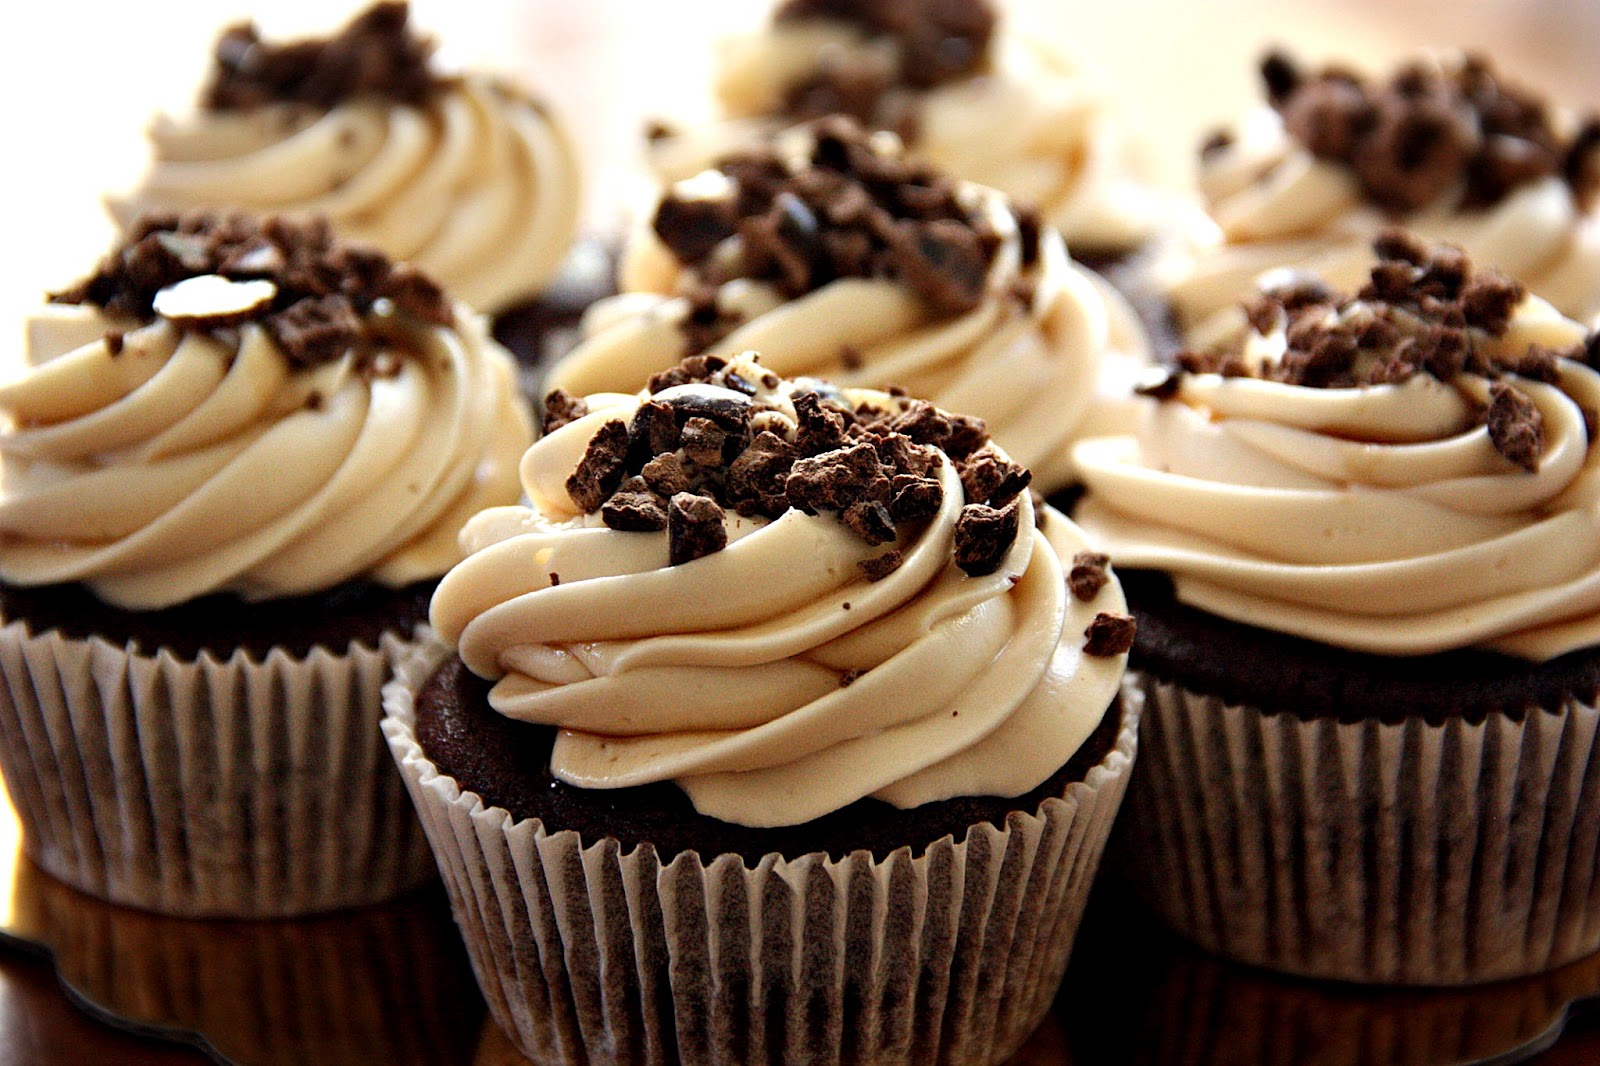 Kahlua Cupcakes with Chocolate Frosting